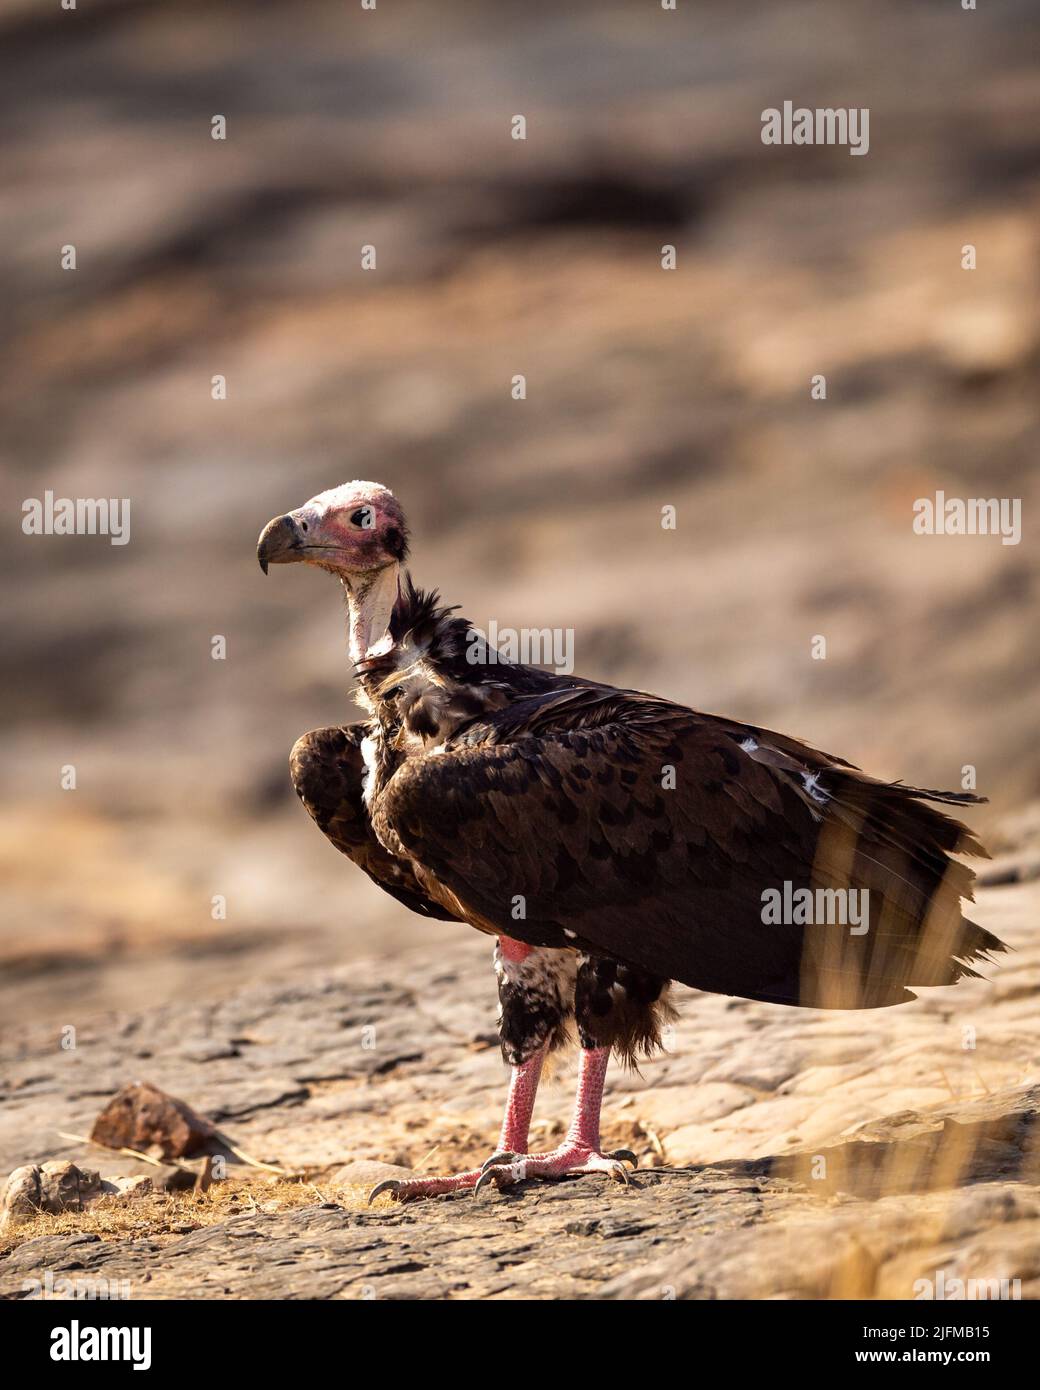 red headed vulture or sarcogyps calvus or Asian king or Indian black vulture closeup or portrait at Ranthambore National Park or forest Reserve india Stock Photo